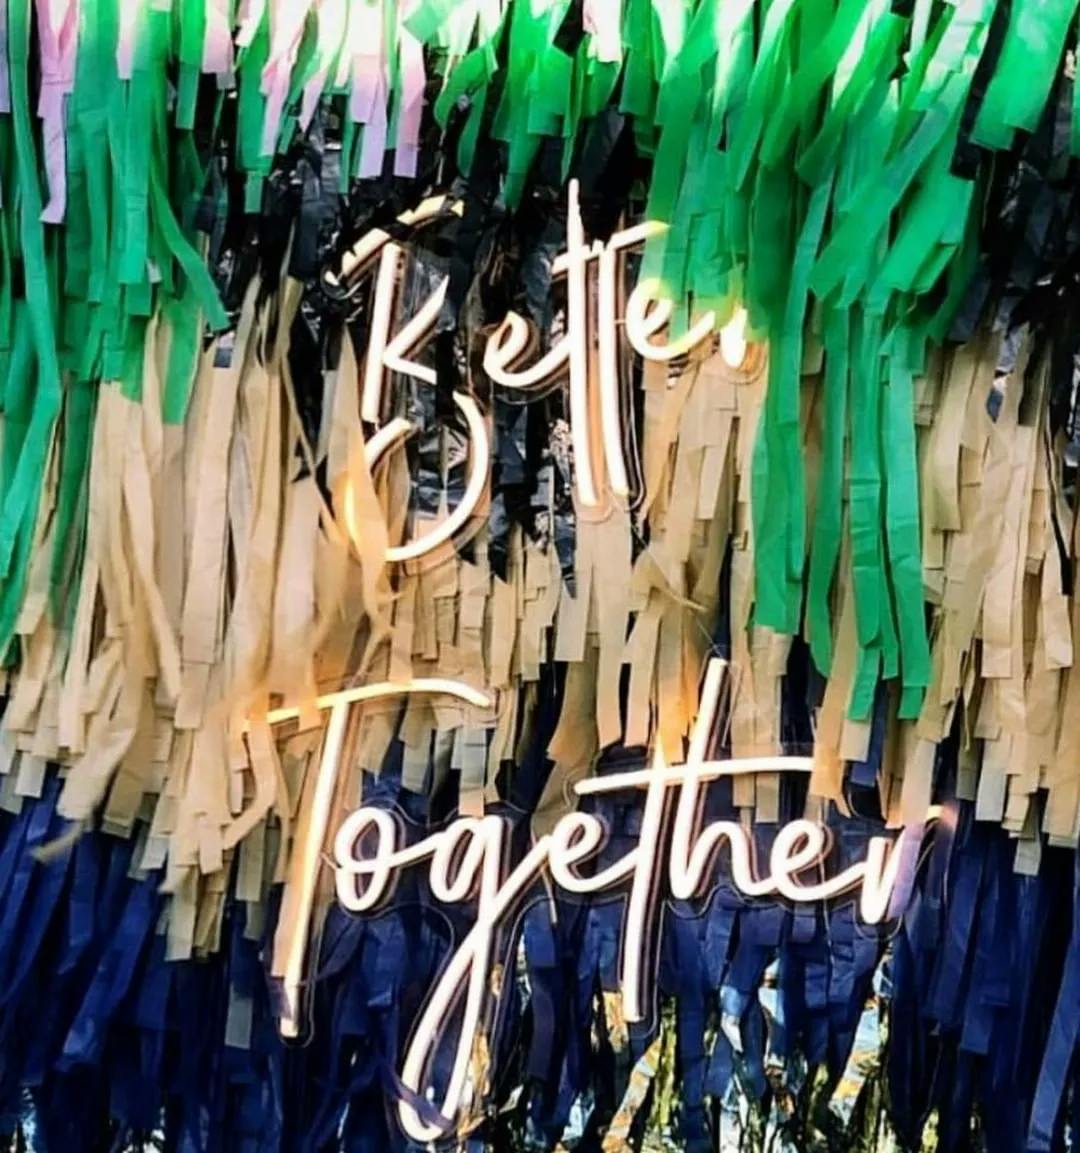 A festive fringe backdrop featuring green, pink, beige, and blue tassels with a neon sign in front that reads "Better Together" in cursive letters.